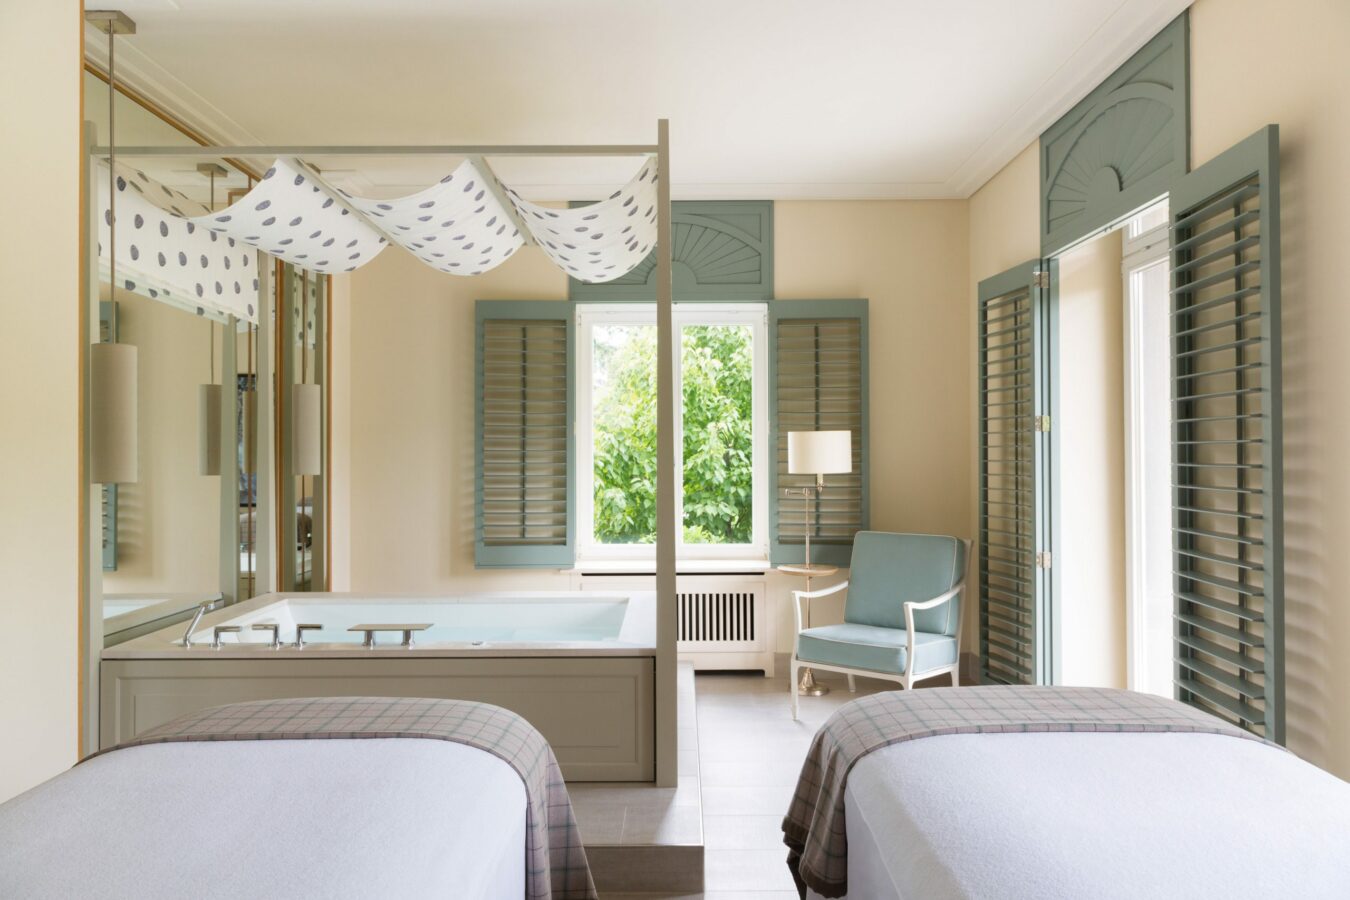 Review - We Check in to Villa Stephanie, Baden Baden, Germany